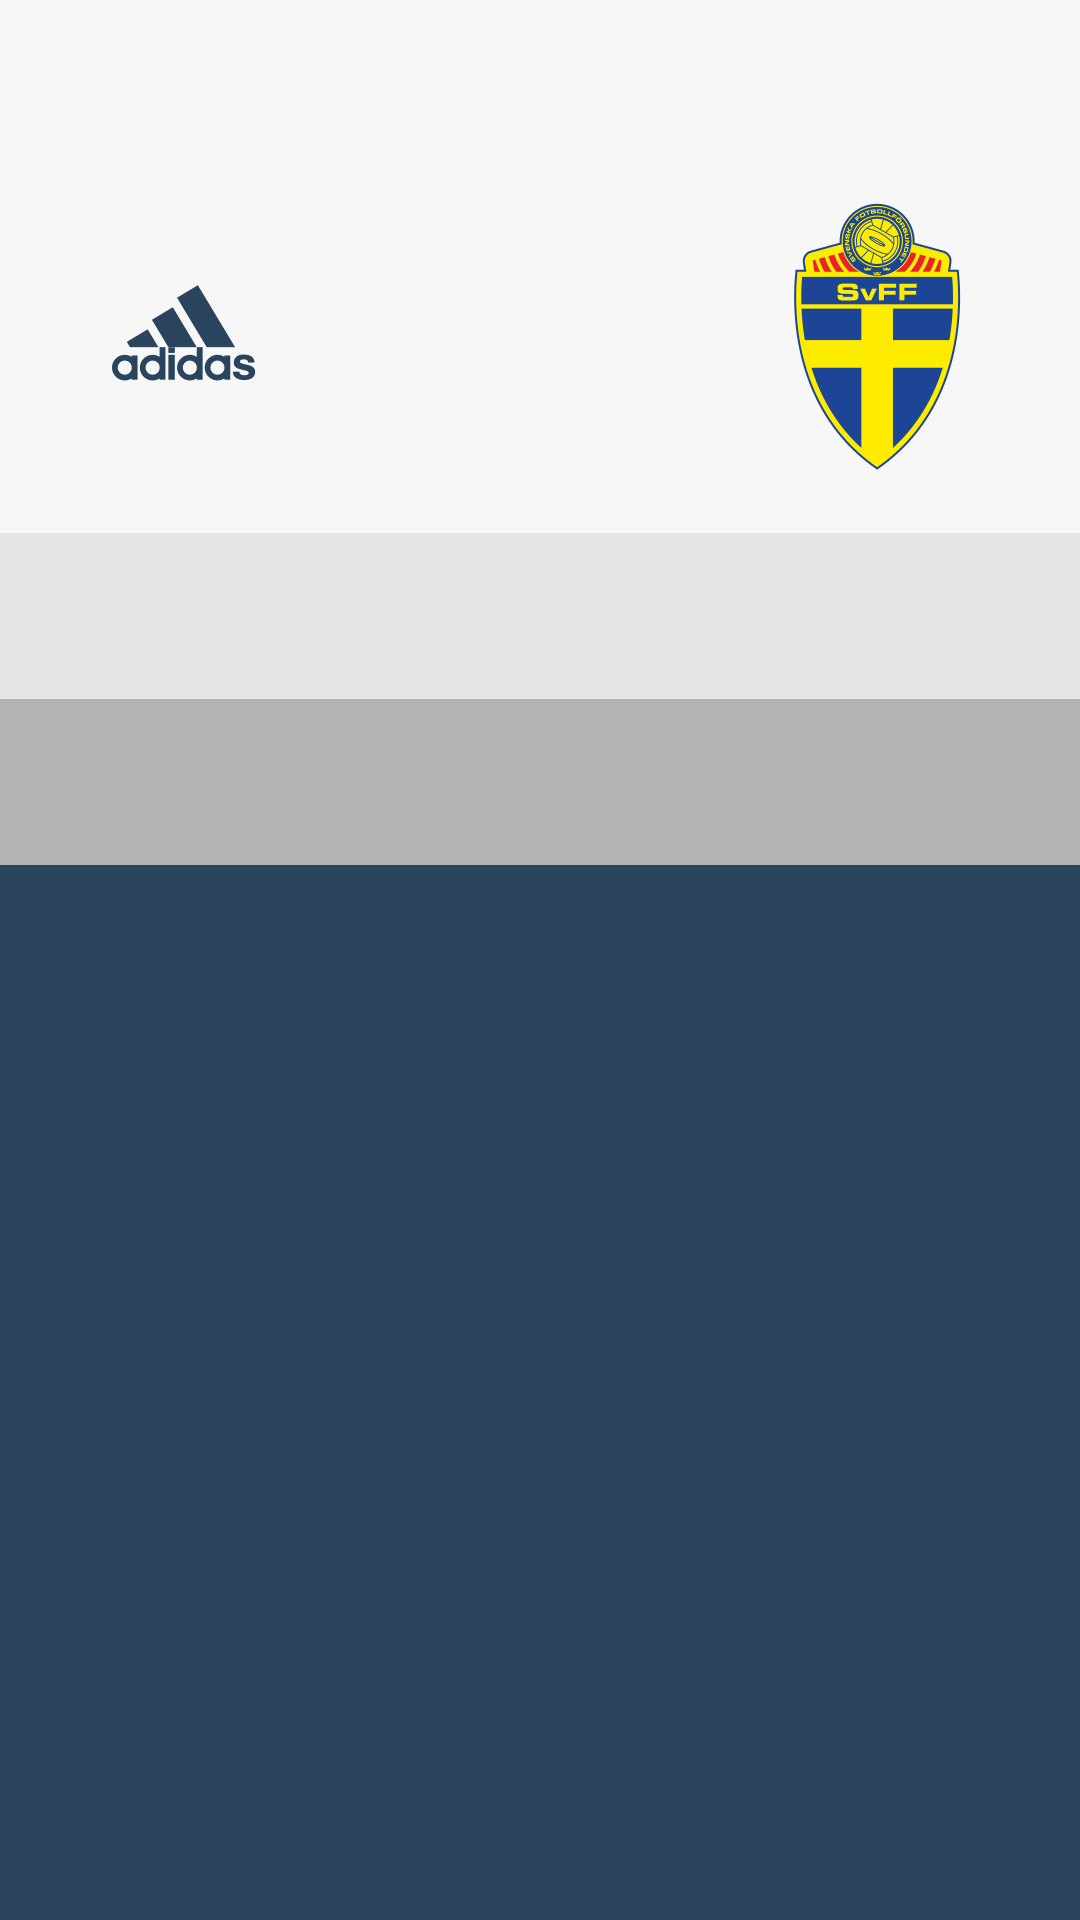 Sweden Away Shirt for EURO 2016 Wallpaper for iPhone and Android